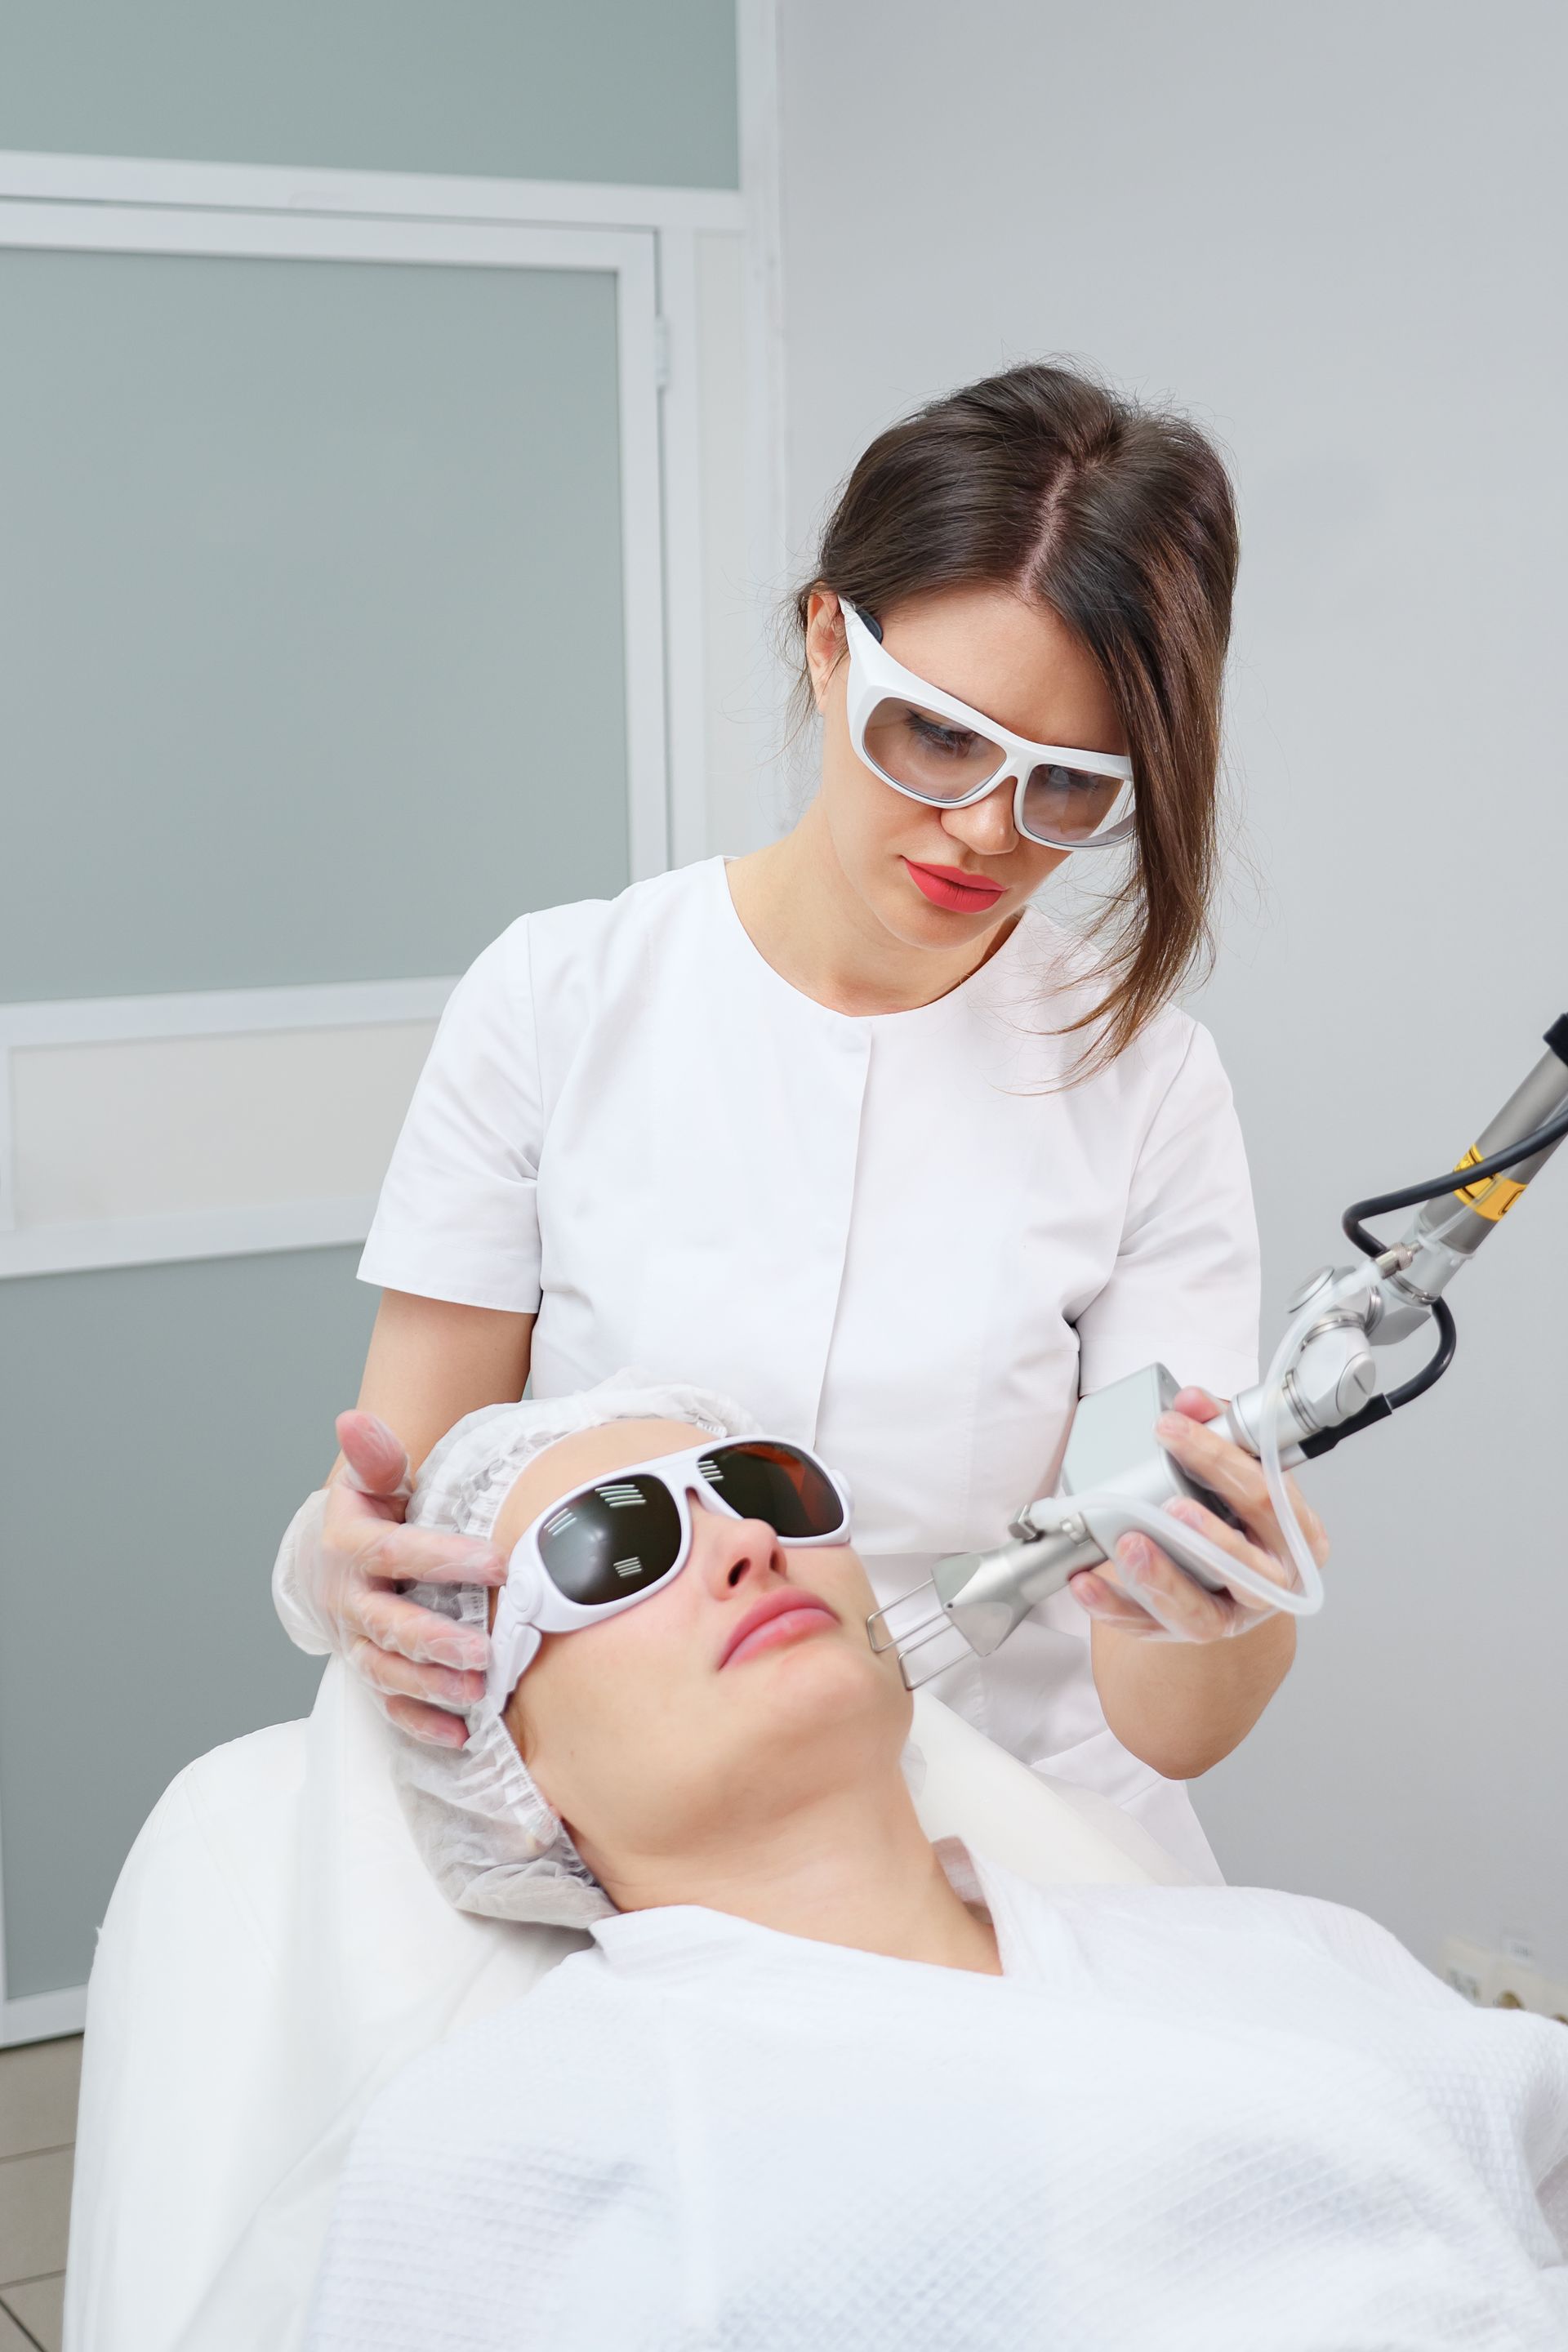 a woman is getting a laser treatment on her face .